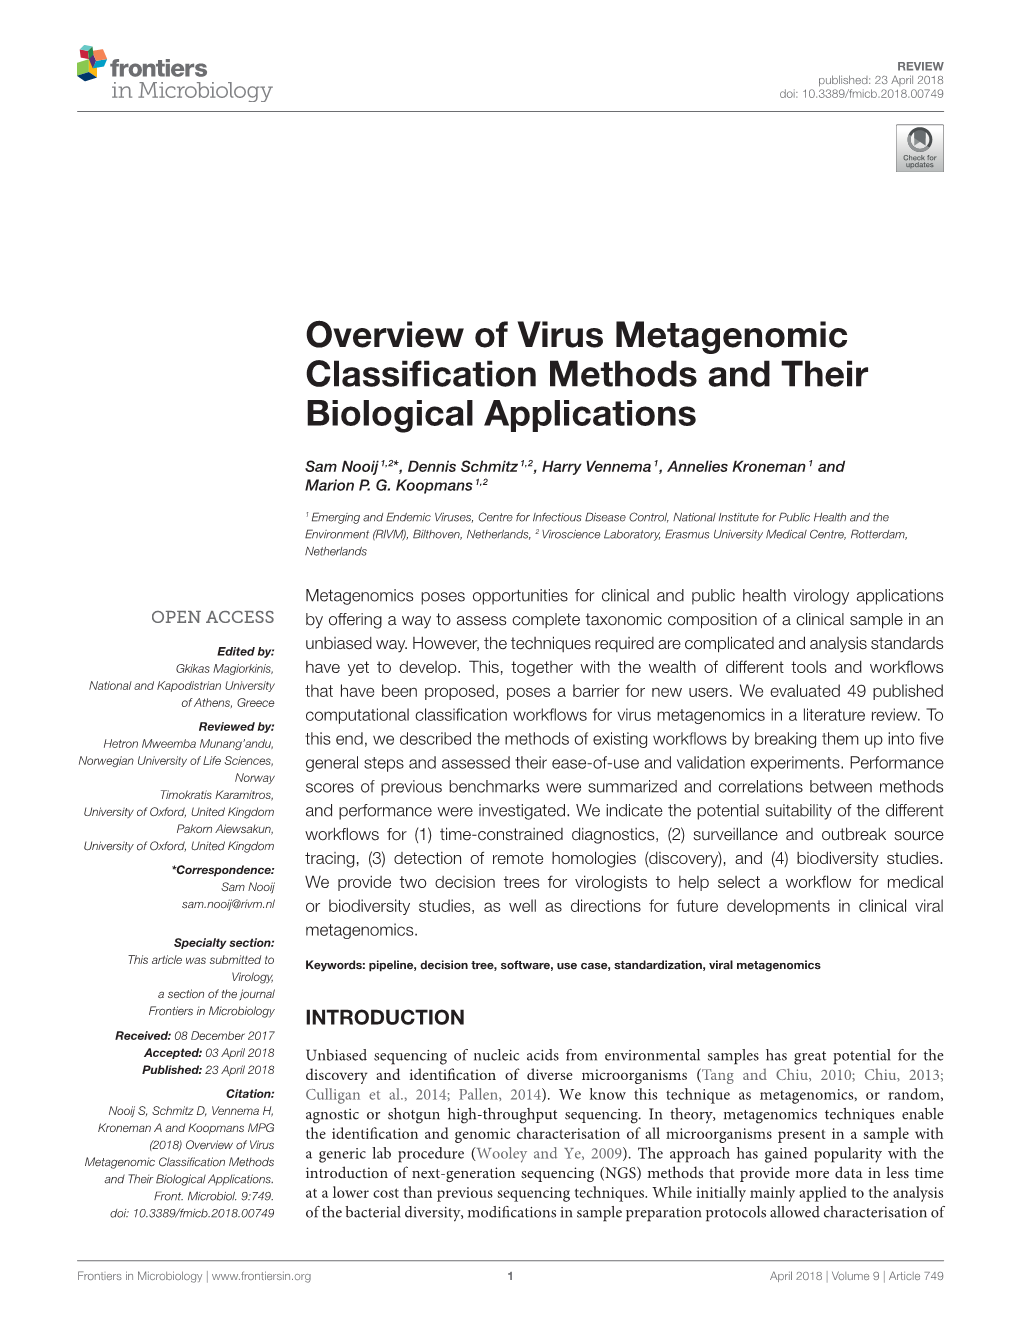 Overview of Virus Metagenomic Classification Methods and Their Biological Applications